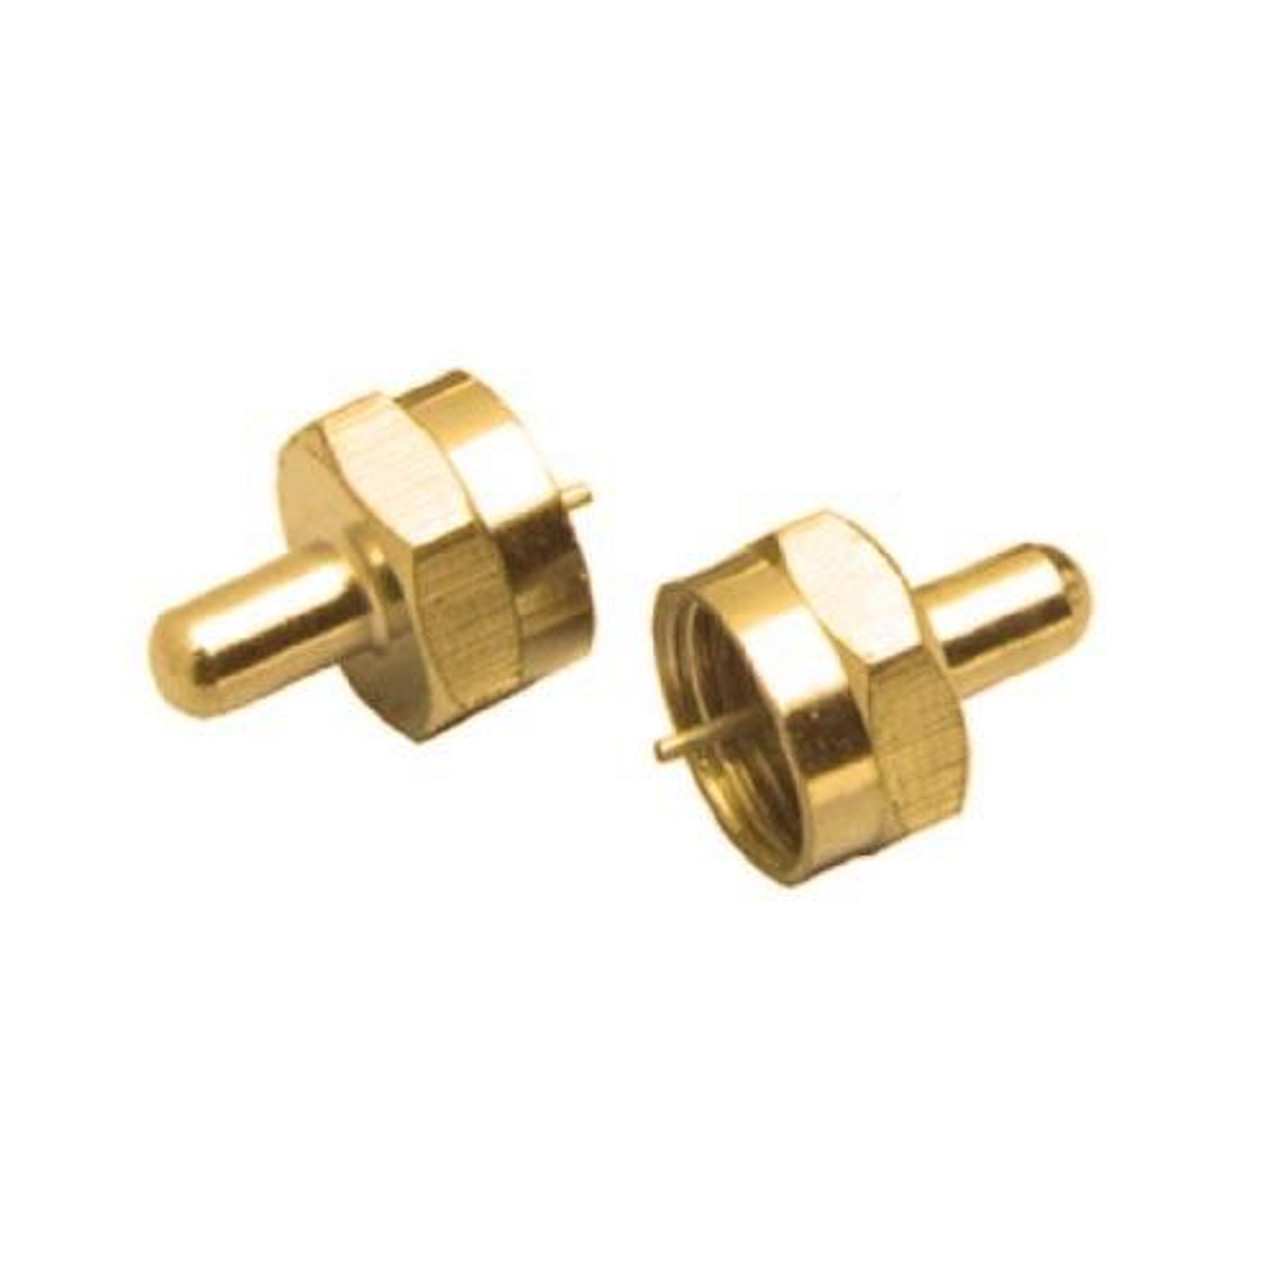 Philips PH61033 Gold Plated F-Connector Terminator Caps 2 Pack Connector Coax Cable 75 Ohm F Component Jack Digital Audio Video Signal, Impedance Matching, Part # PH-61033